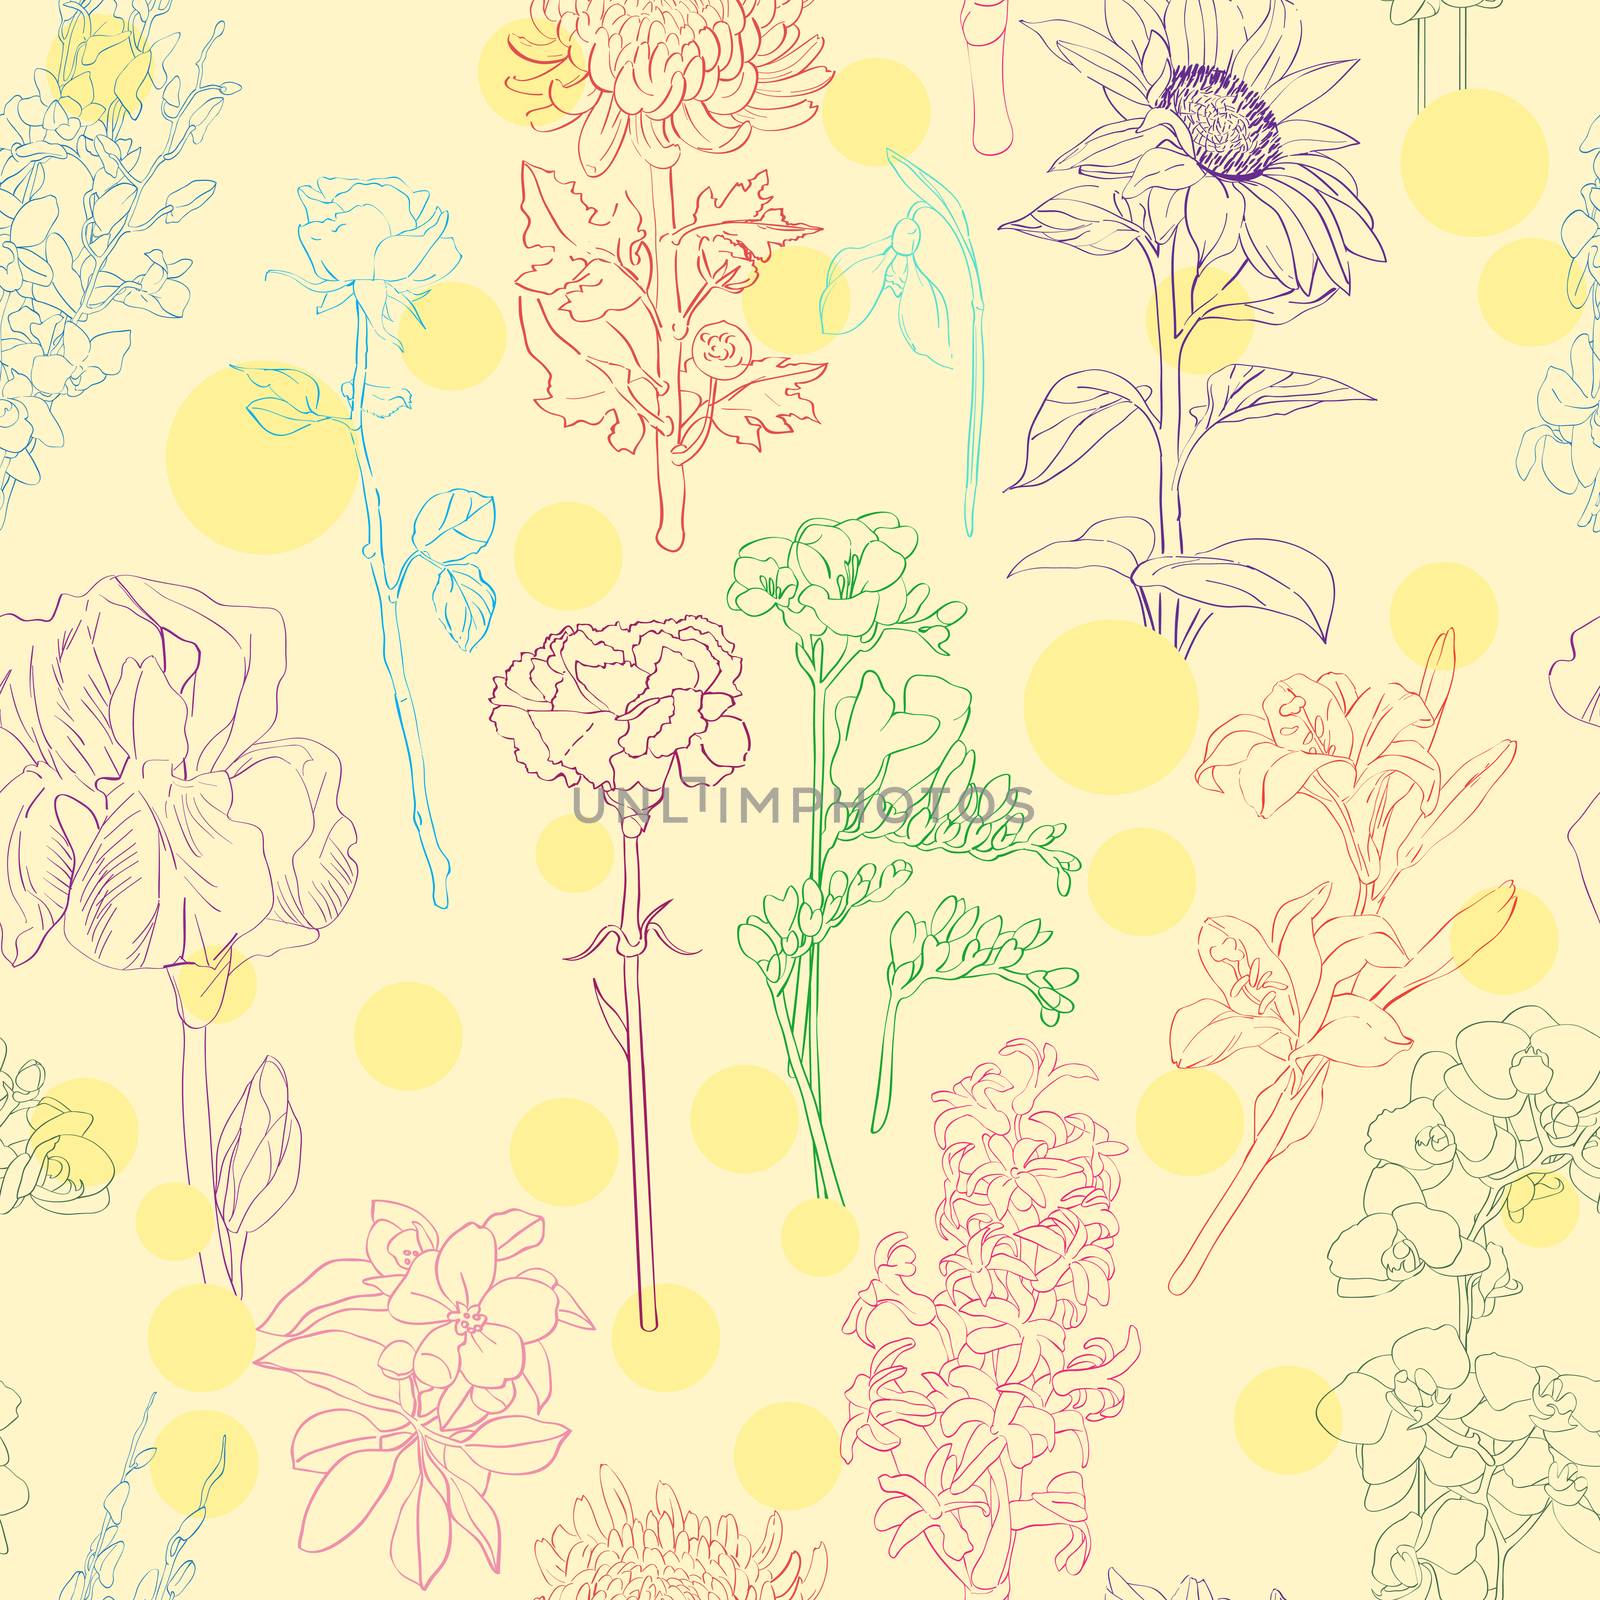 Floral pattern illustration, beautiful hand drawn color sketches of twelve different flowers over yellow background